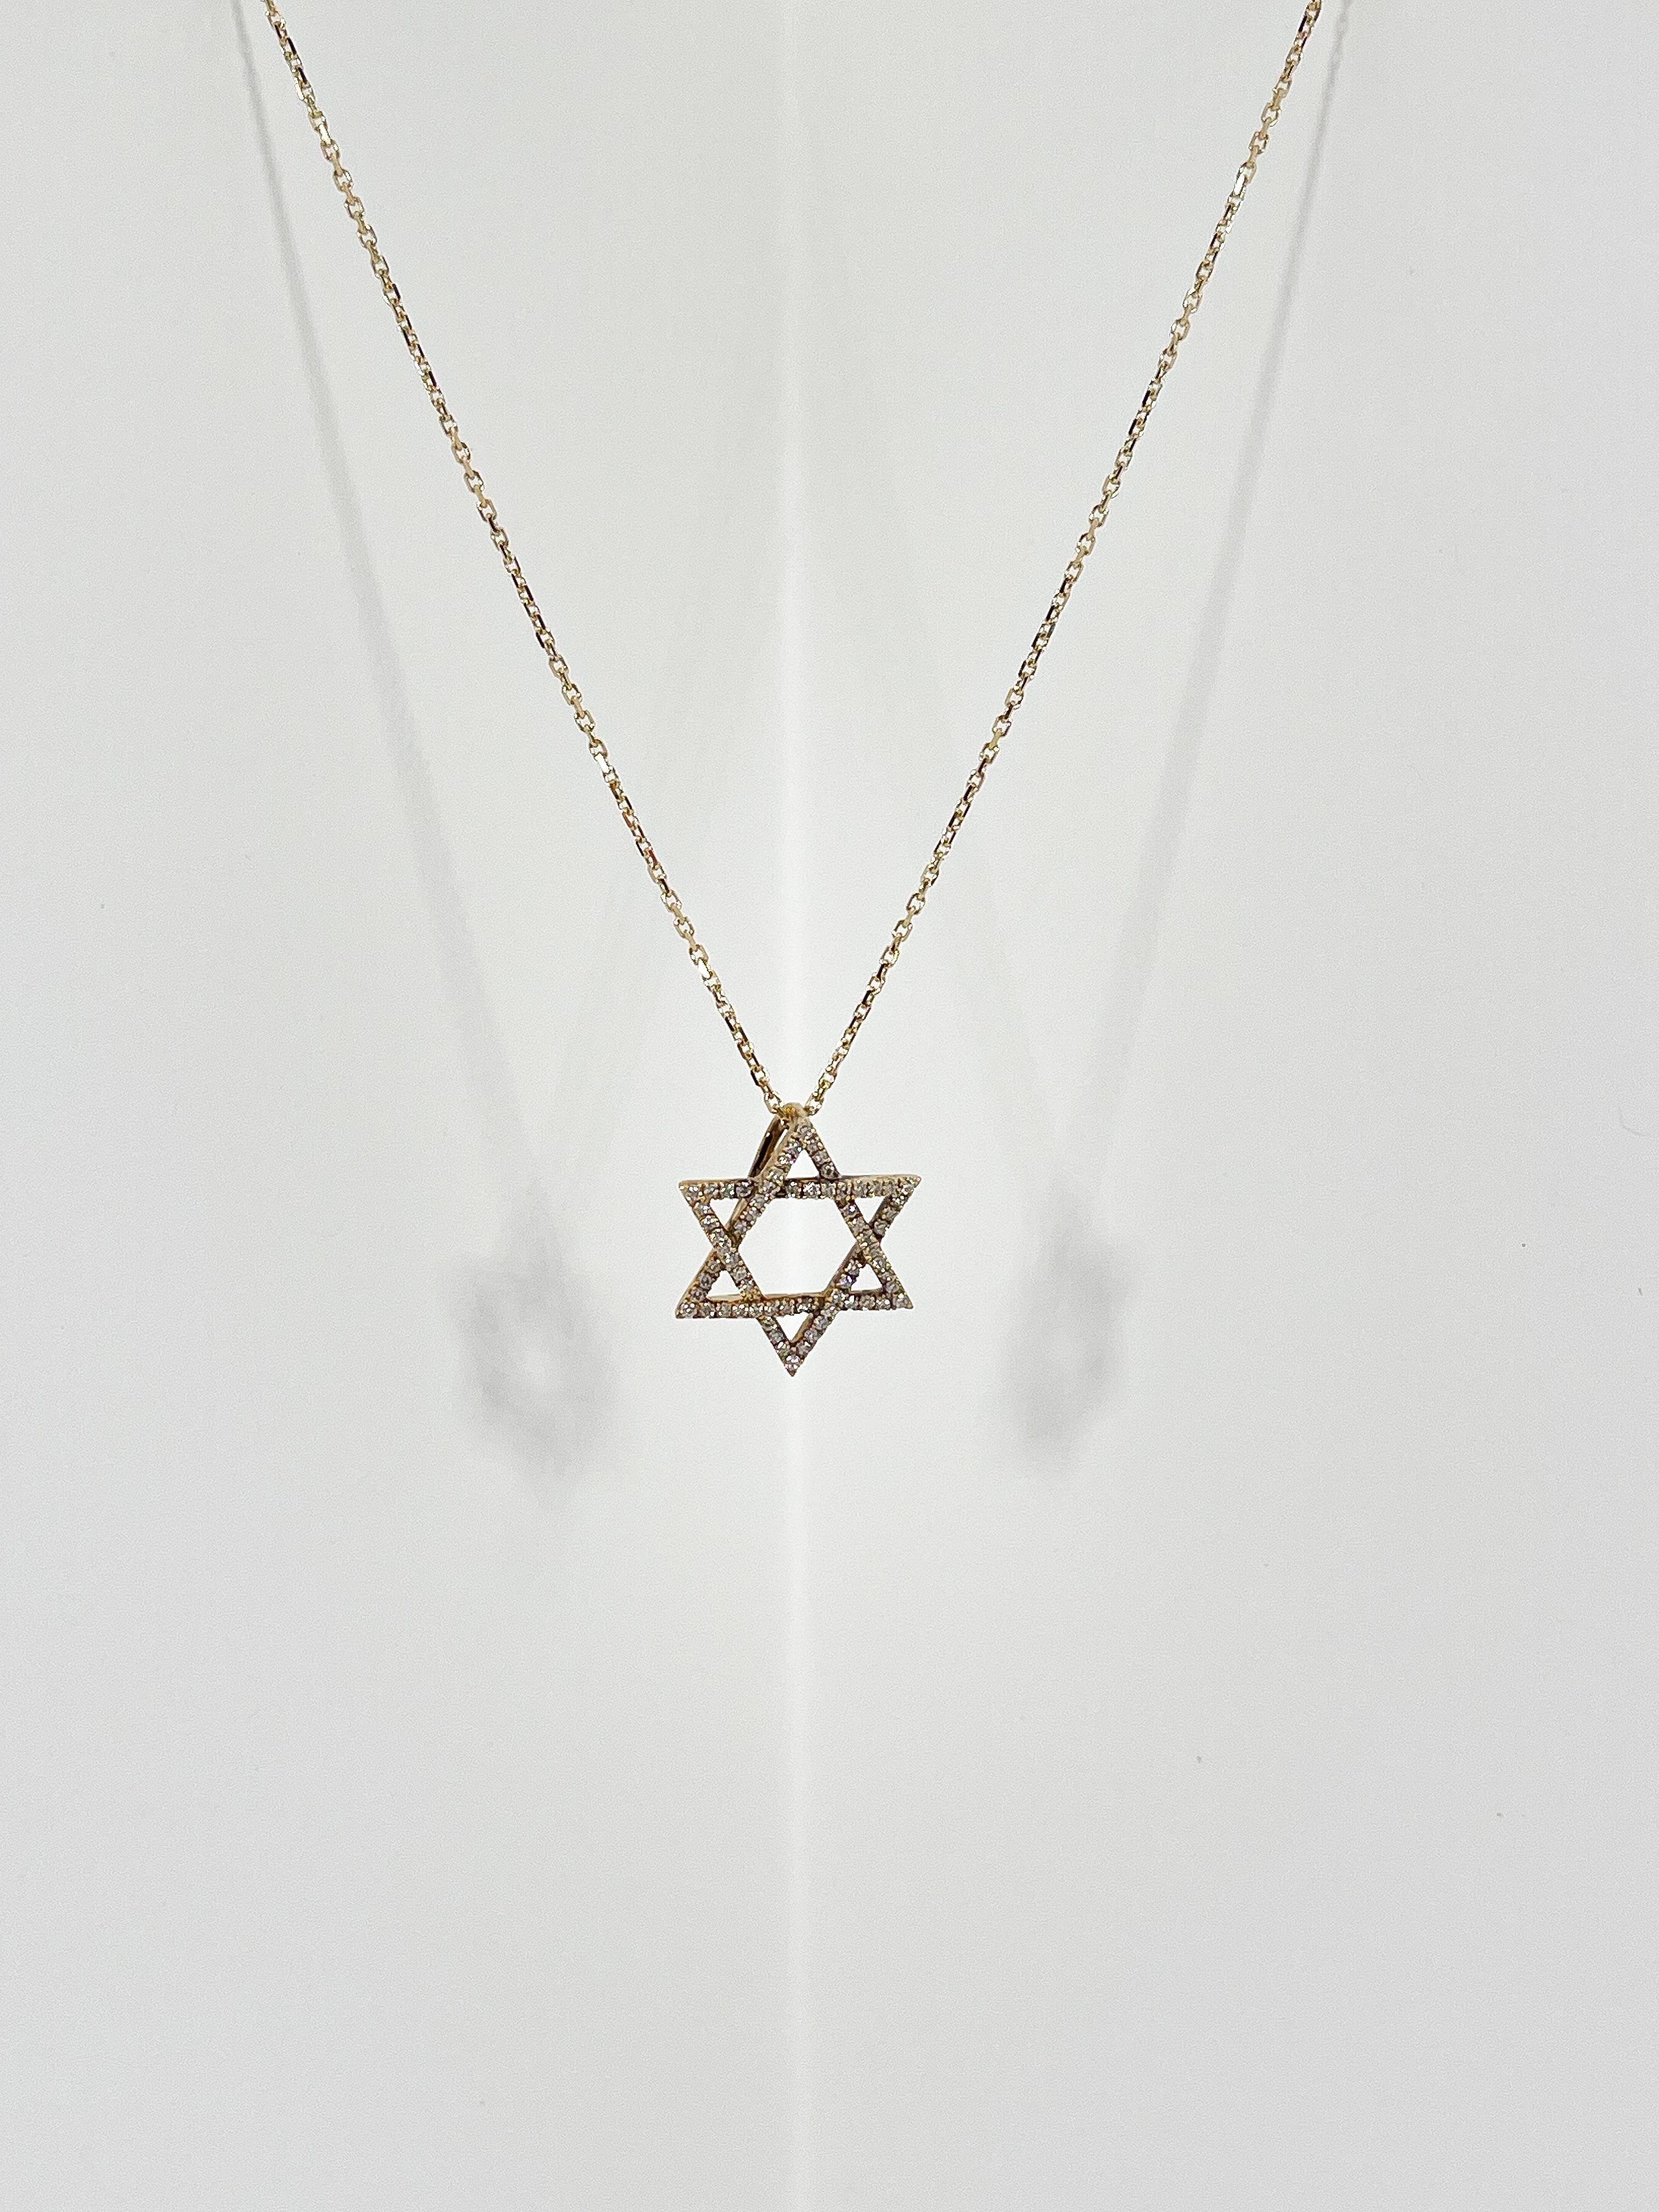 14k yellow gold .30 CTW diamond Star of David pendant necklace. The diamonds in the pendant are round, the pendant measures 17.3mm x 15mm, has a lobster clasp to open and close, pendant comes on a 16-inch diamond cut cable chain, and the necklace